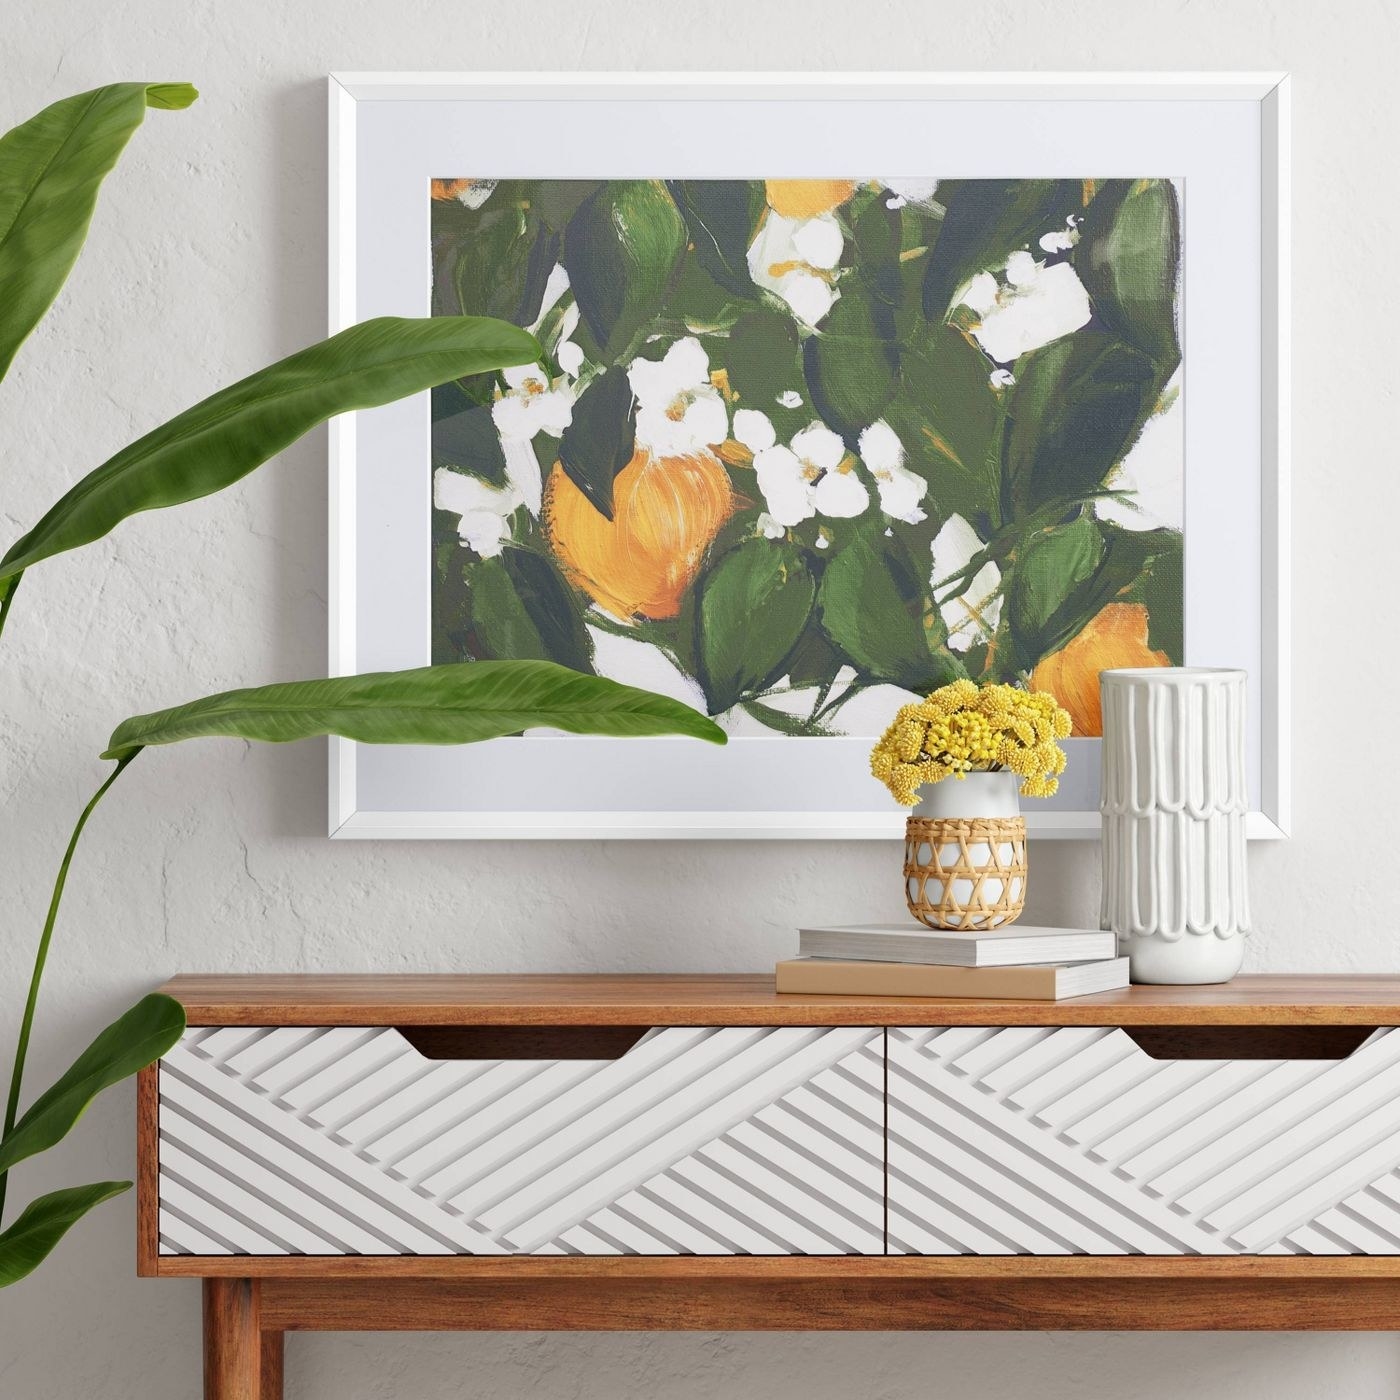 a painting with oranges, white flowers, and greenery over a table